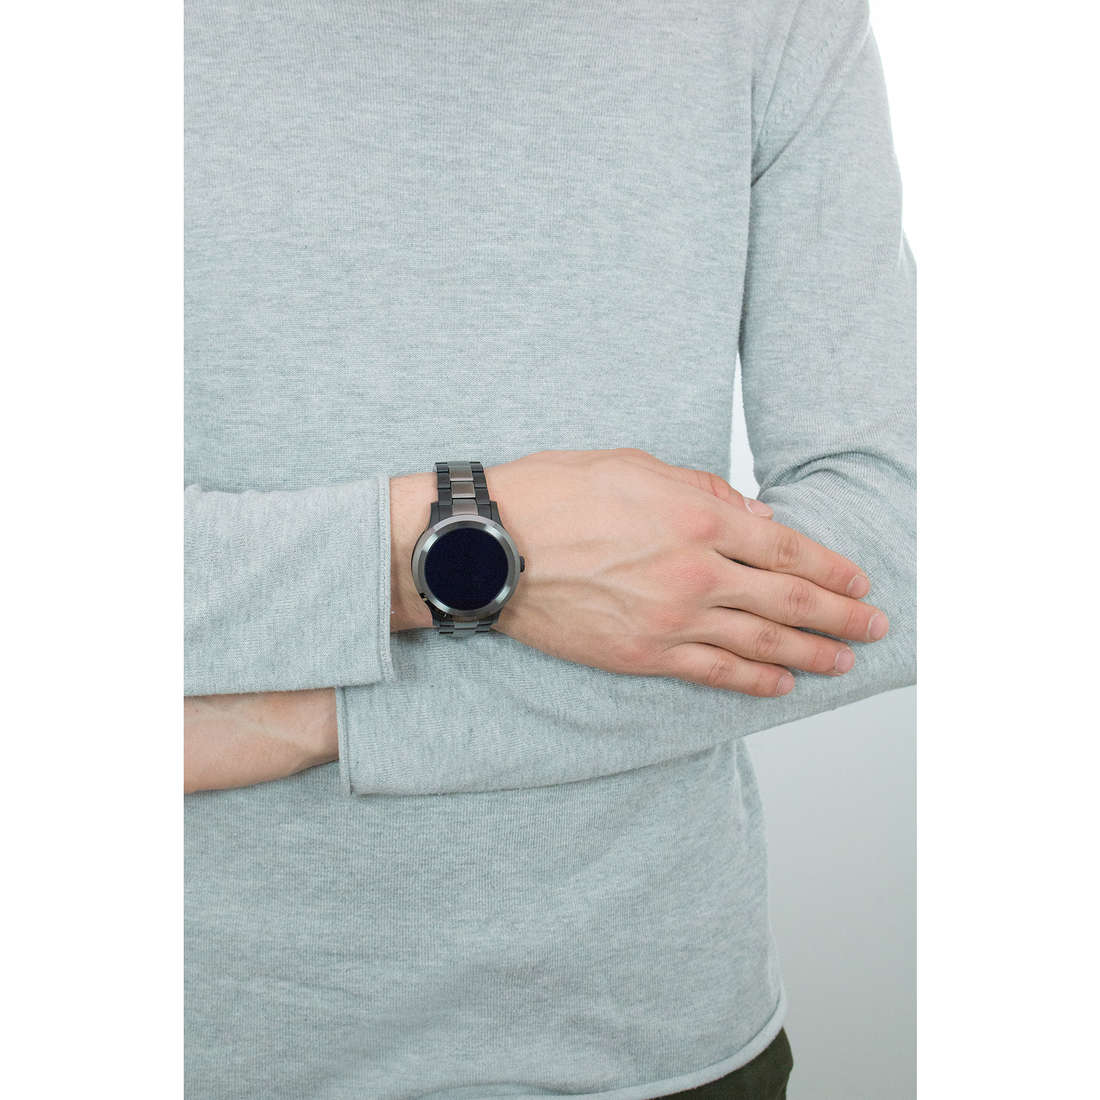 Fossil Smartwatches Q Founder man FTW2117 wearing